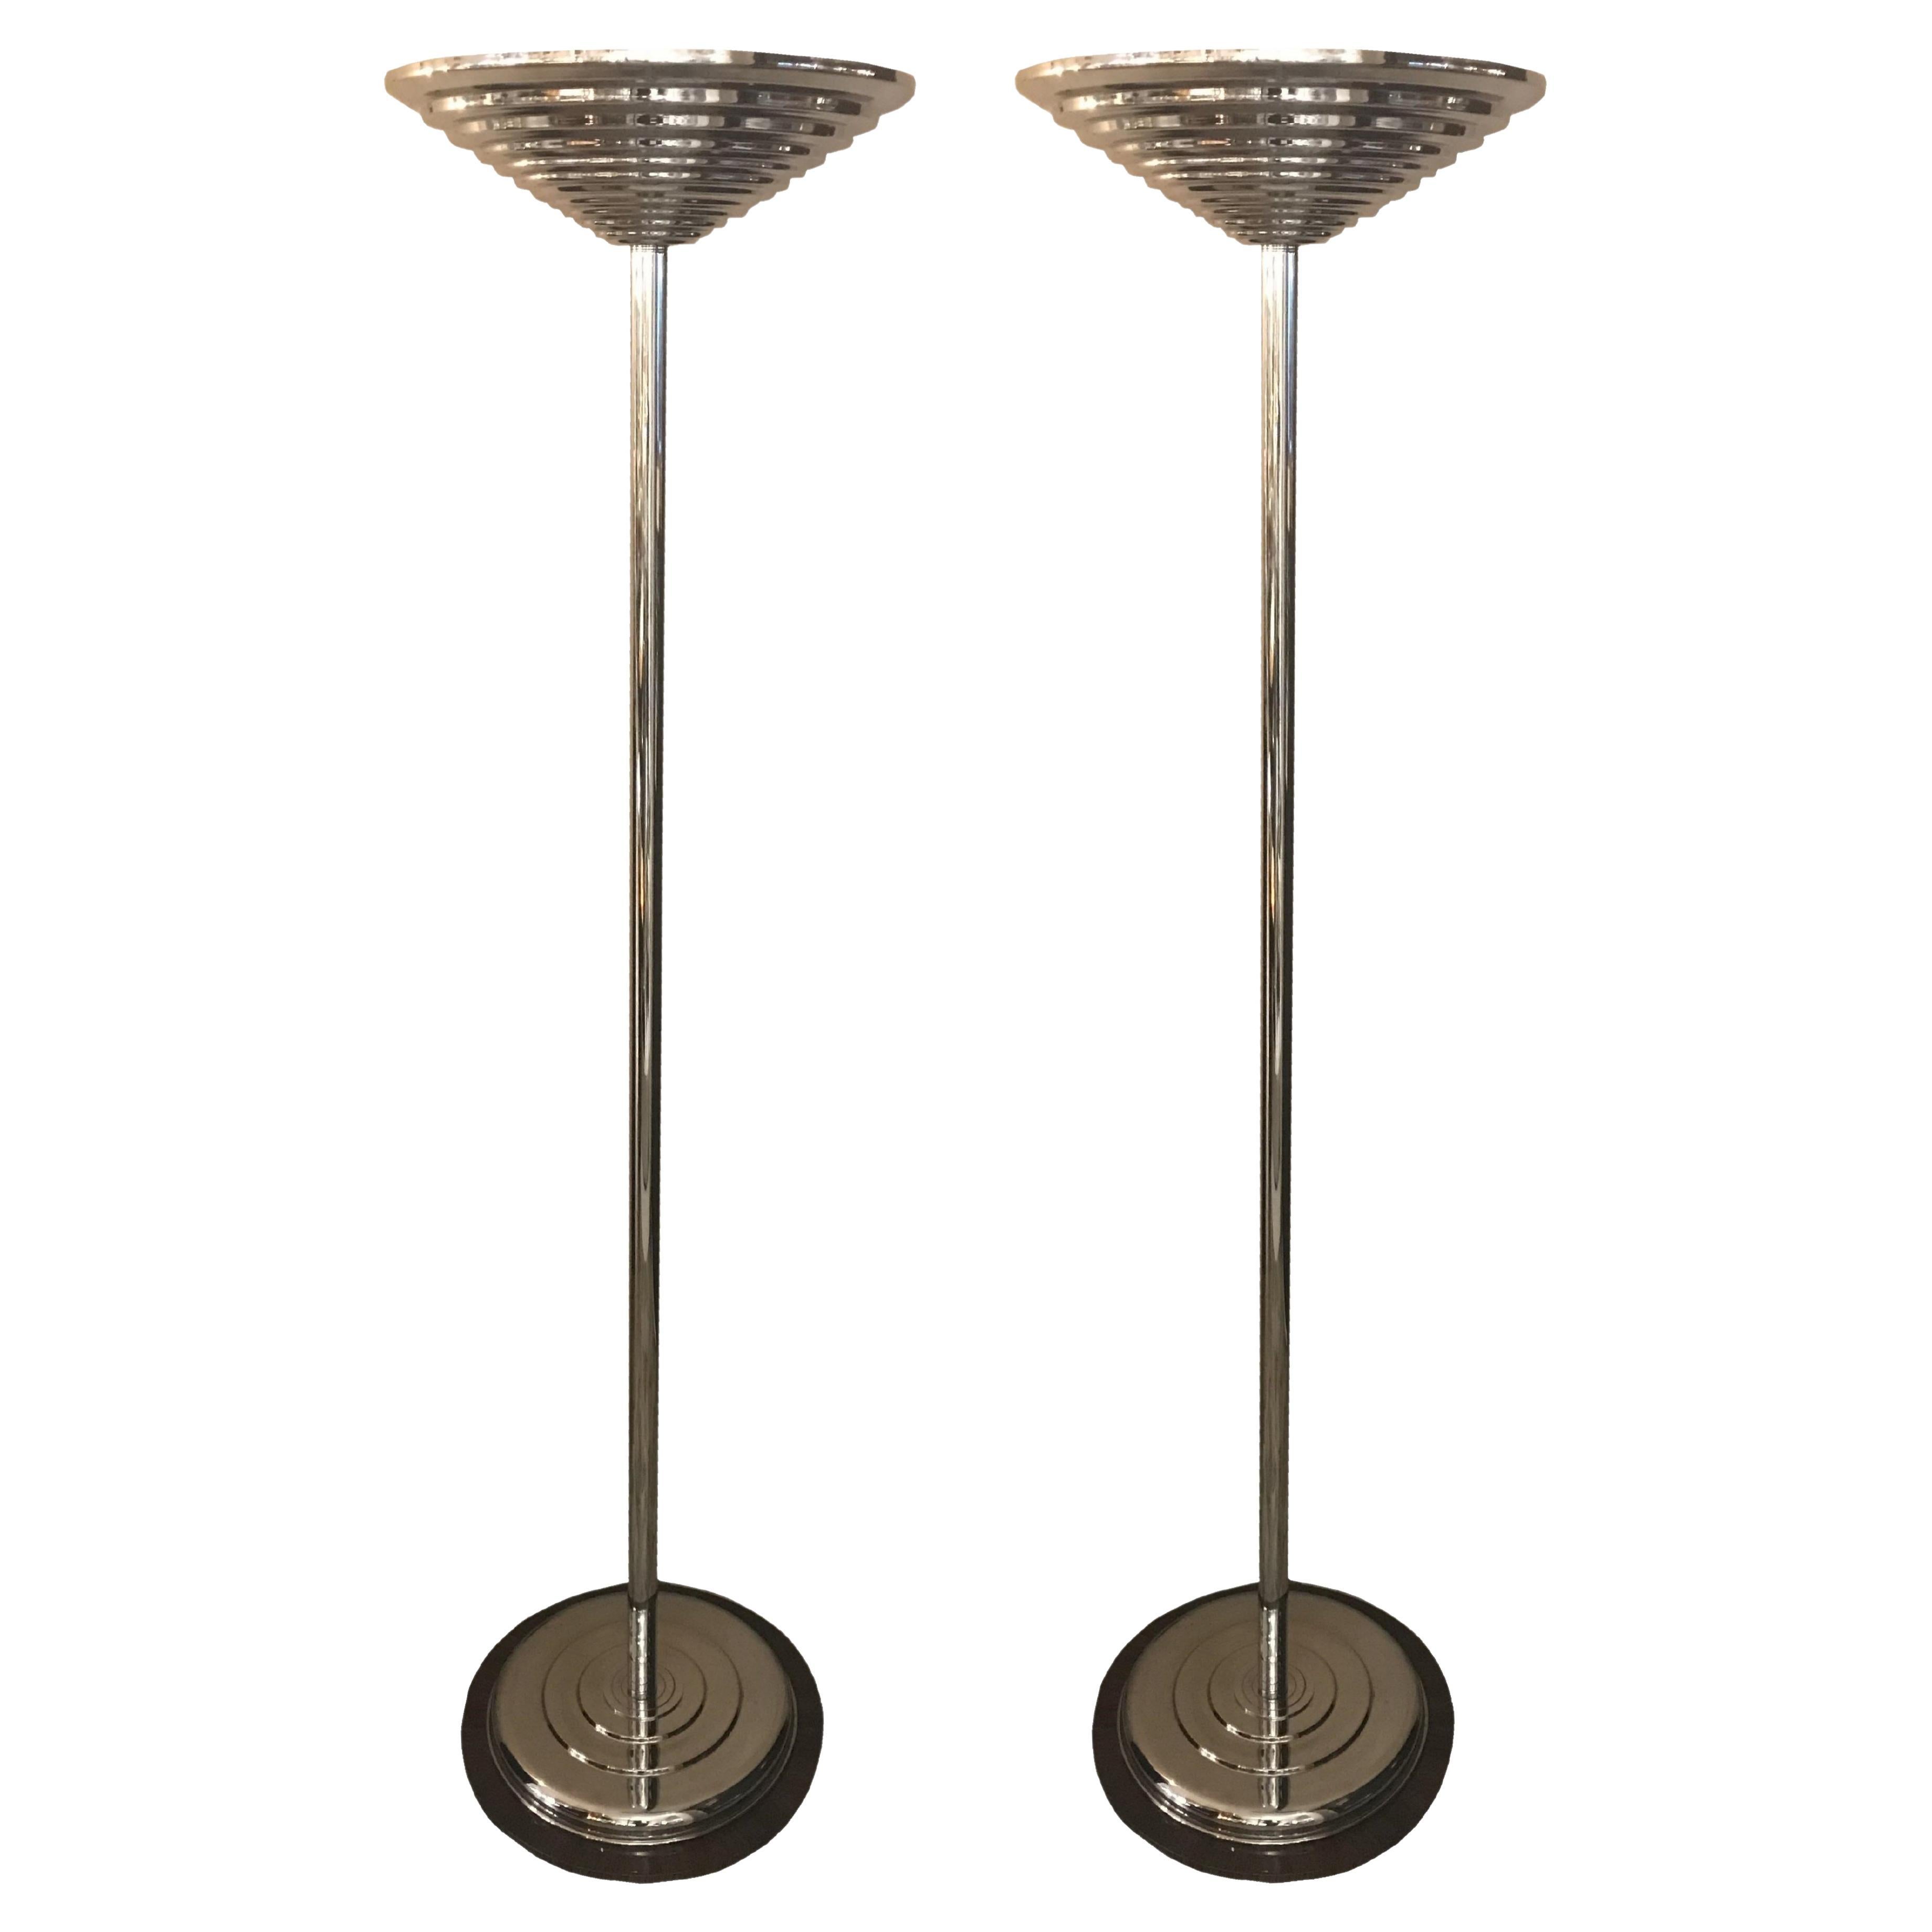 Pair of Art Deco Floor Lamps, France, Glass, Wood and Chrome, 1930 For Sale